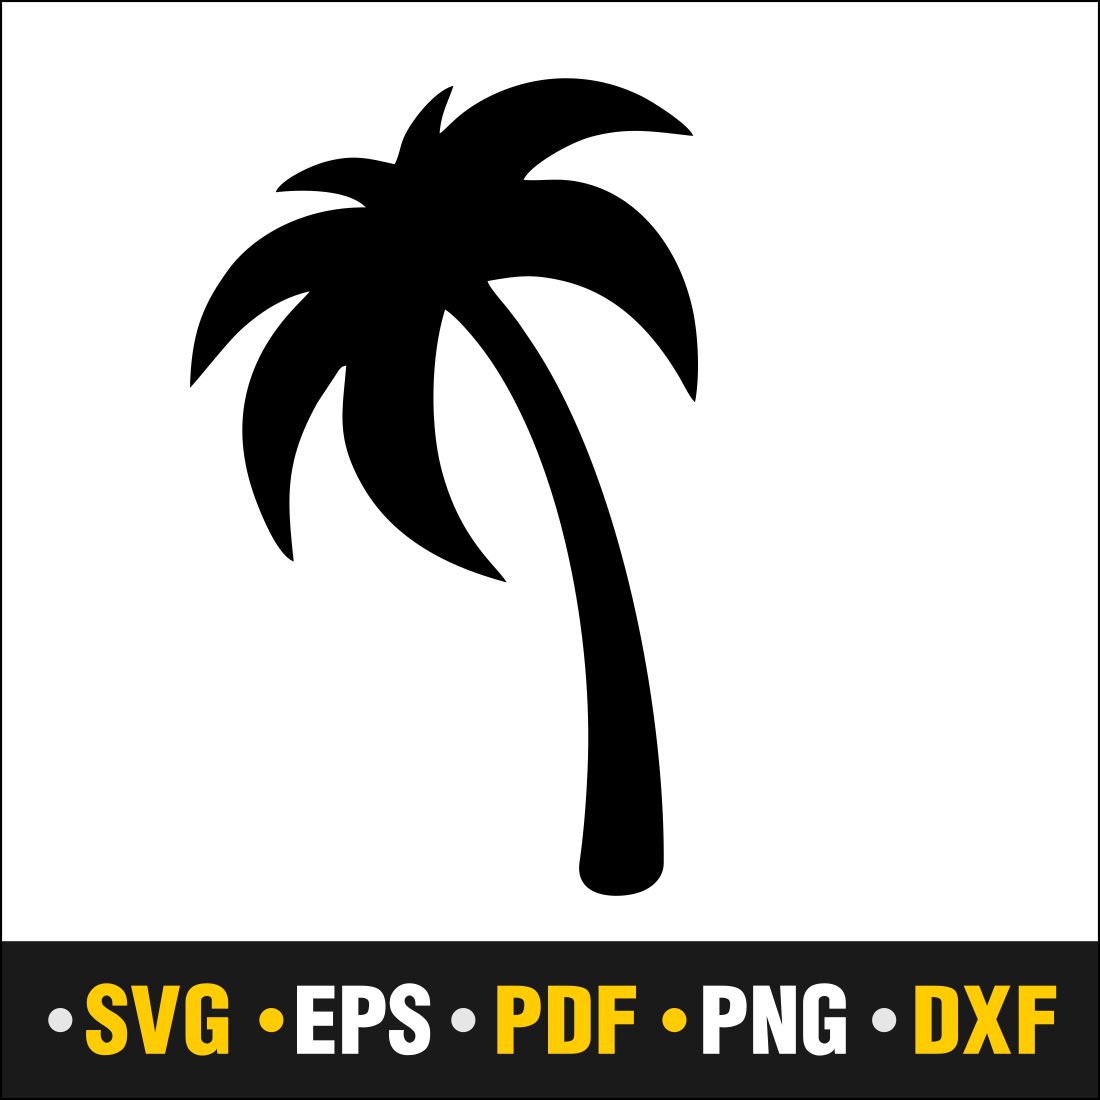 Palm Tree Svg, Palm Tree Frame Svg Vector Cut file Cricut, Silhouette, Pdf Png, Dxf, Decal, Sticker, Stencil, Vinyl cover image.